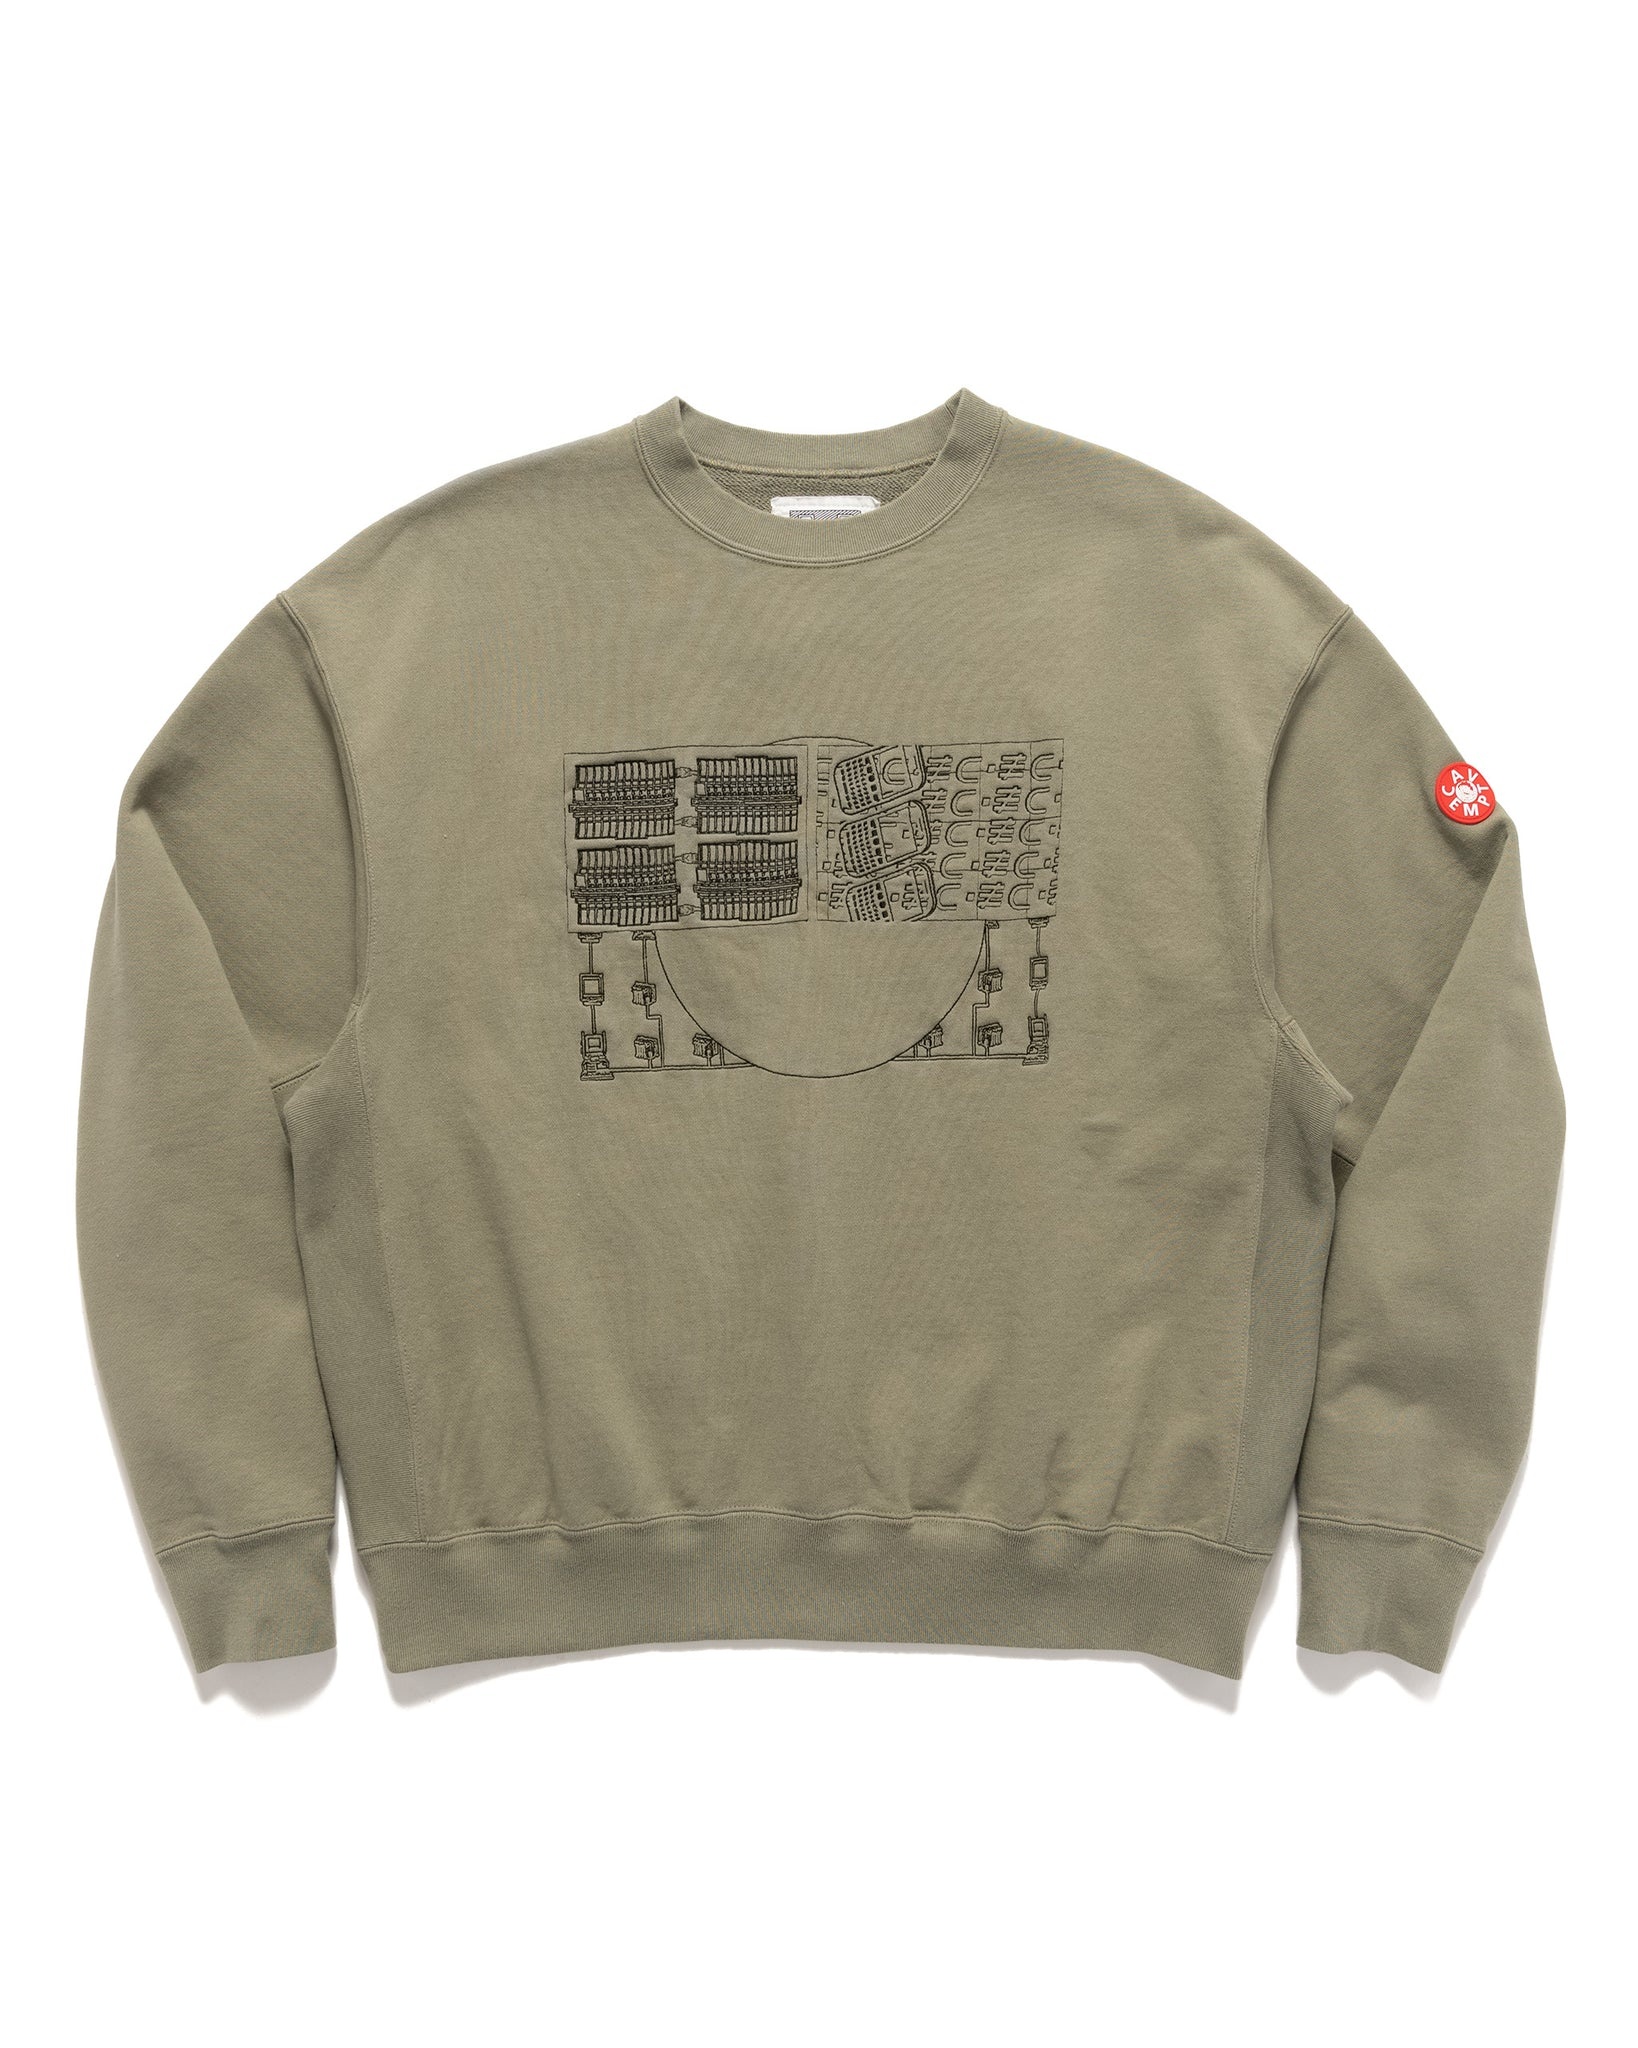 NOT IDENTICAL TO CREWNECK OLIVE - 1